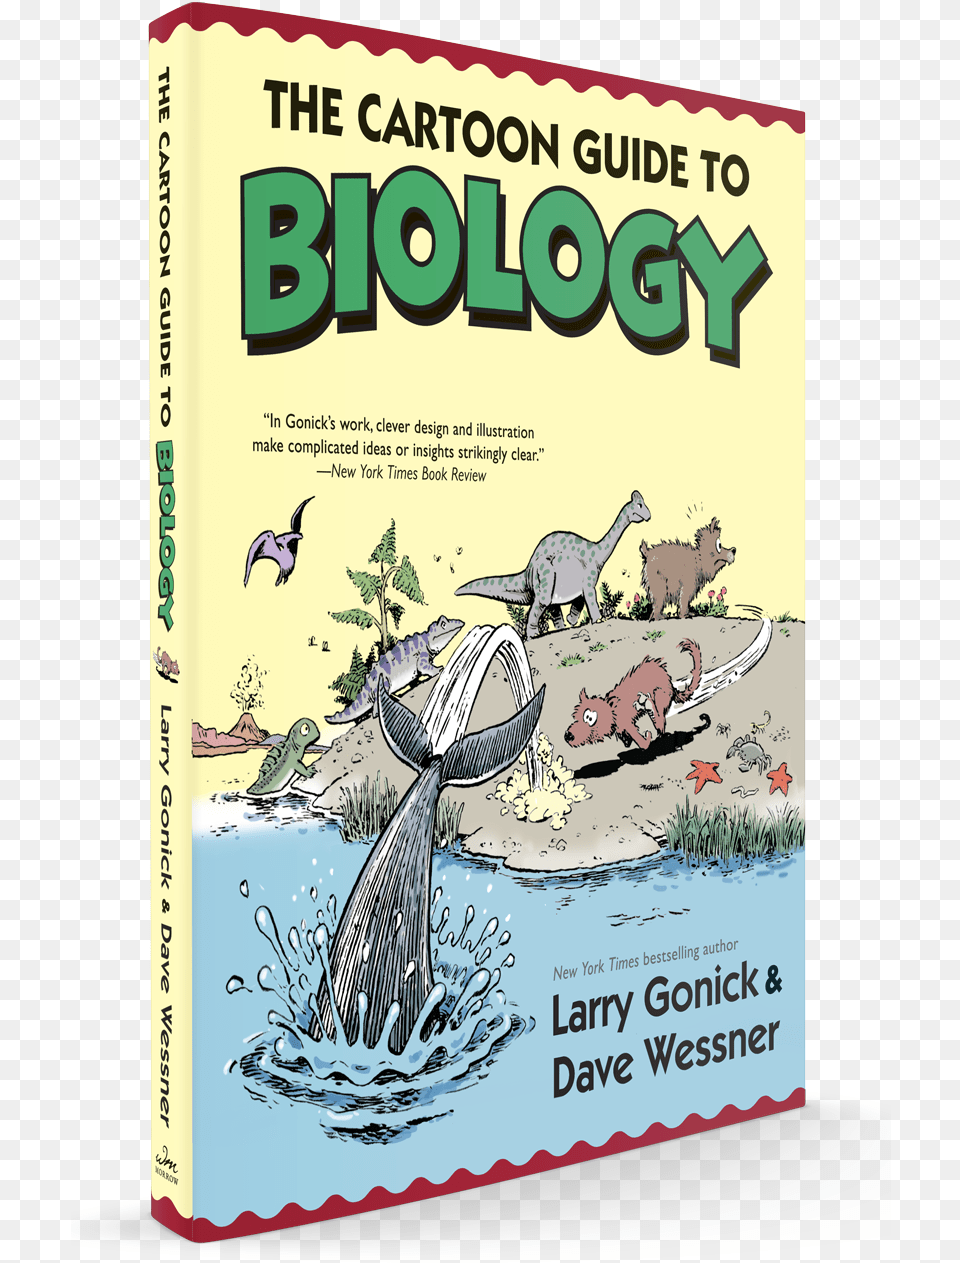 The Cartoon Guide To Biology Poster, Book, Publication, Whale, Sea Life Free Png